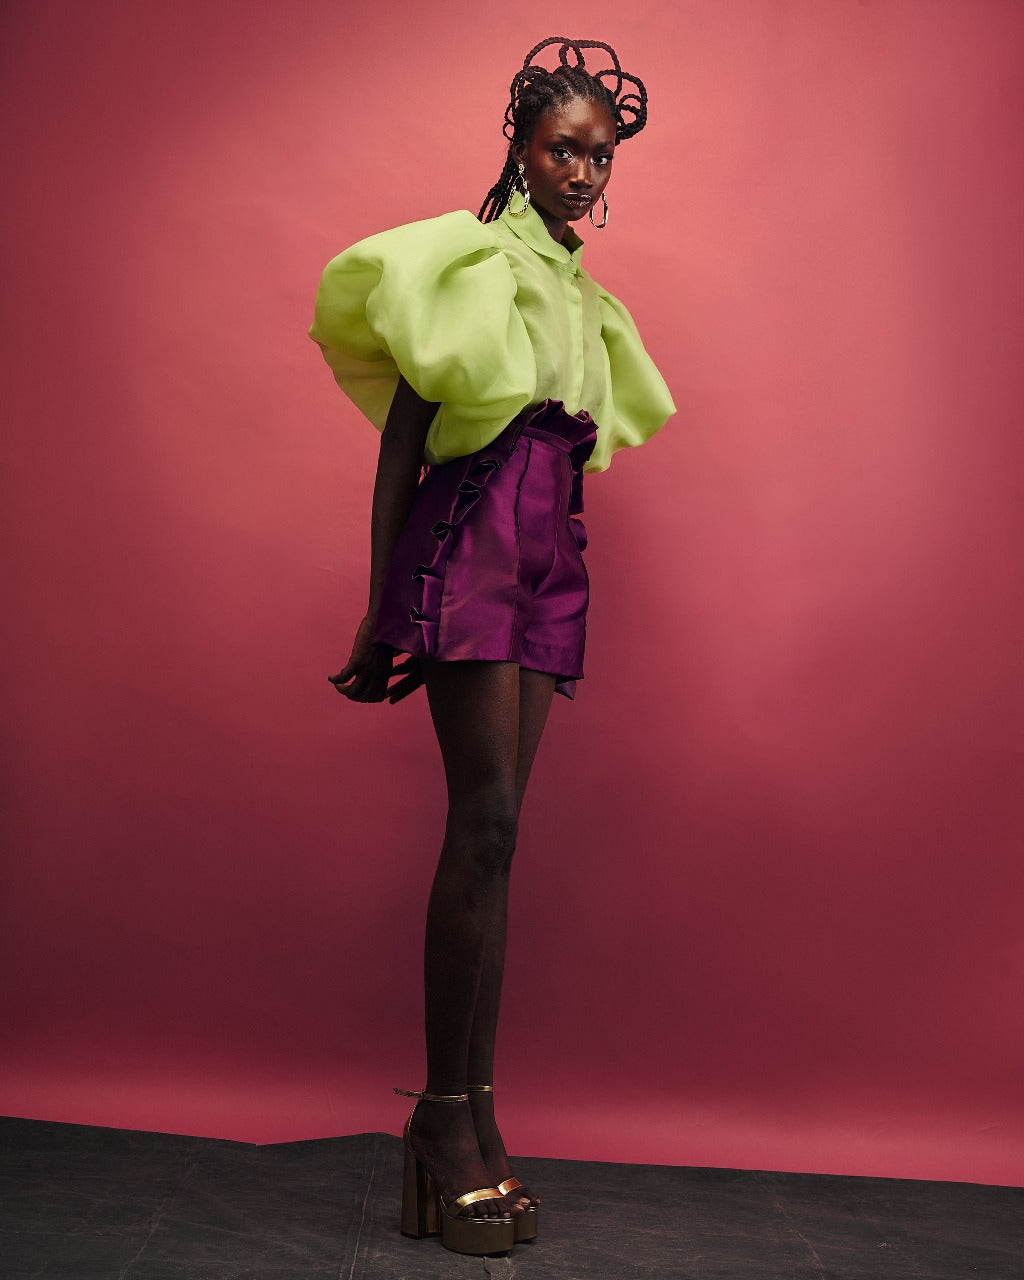 A model wearing a lime green top and Aubergine colored shorts with ruffles in a red room